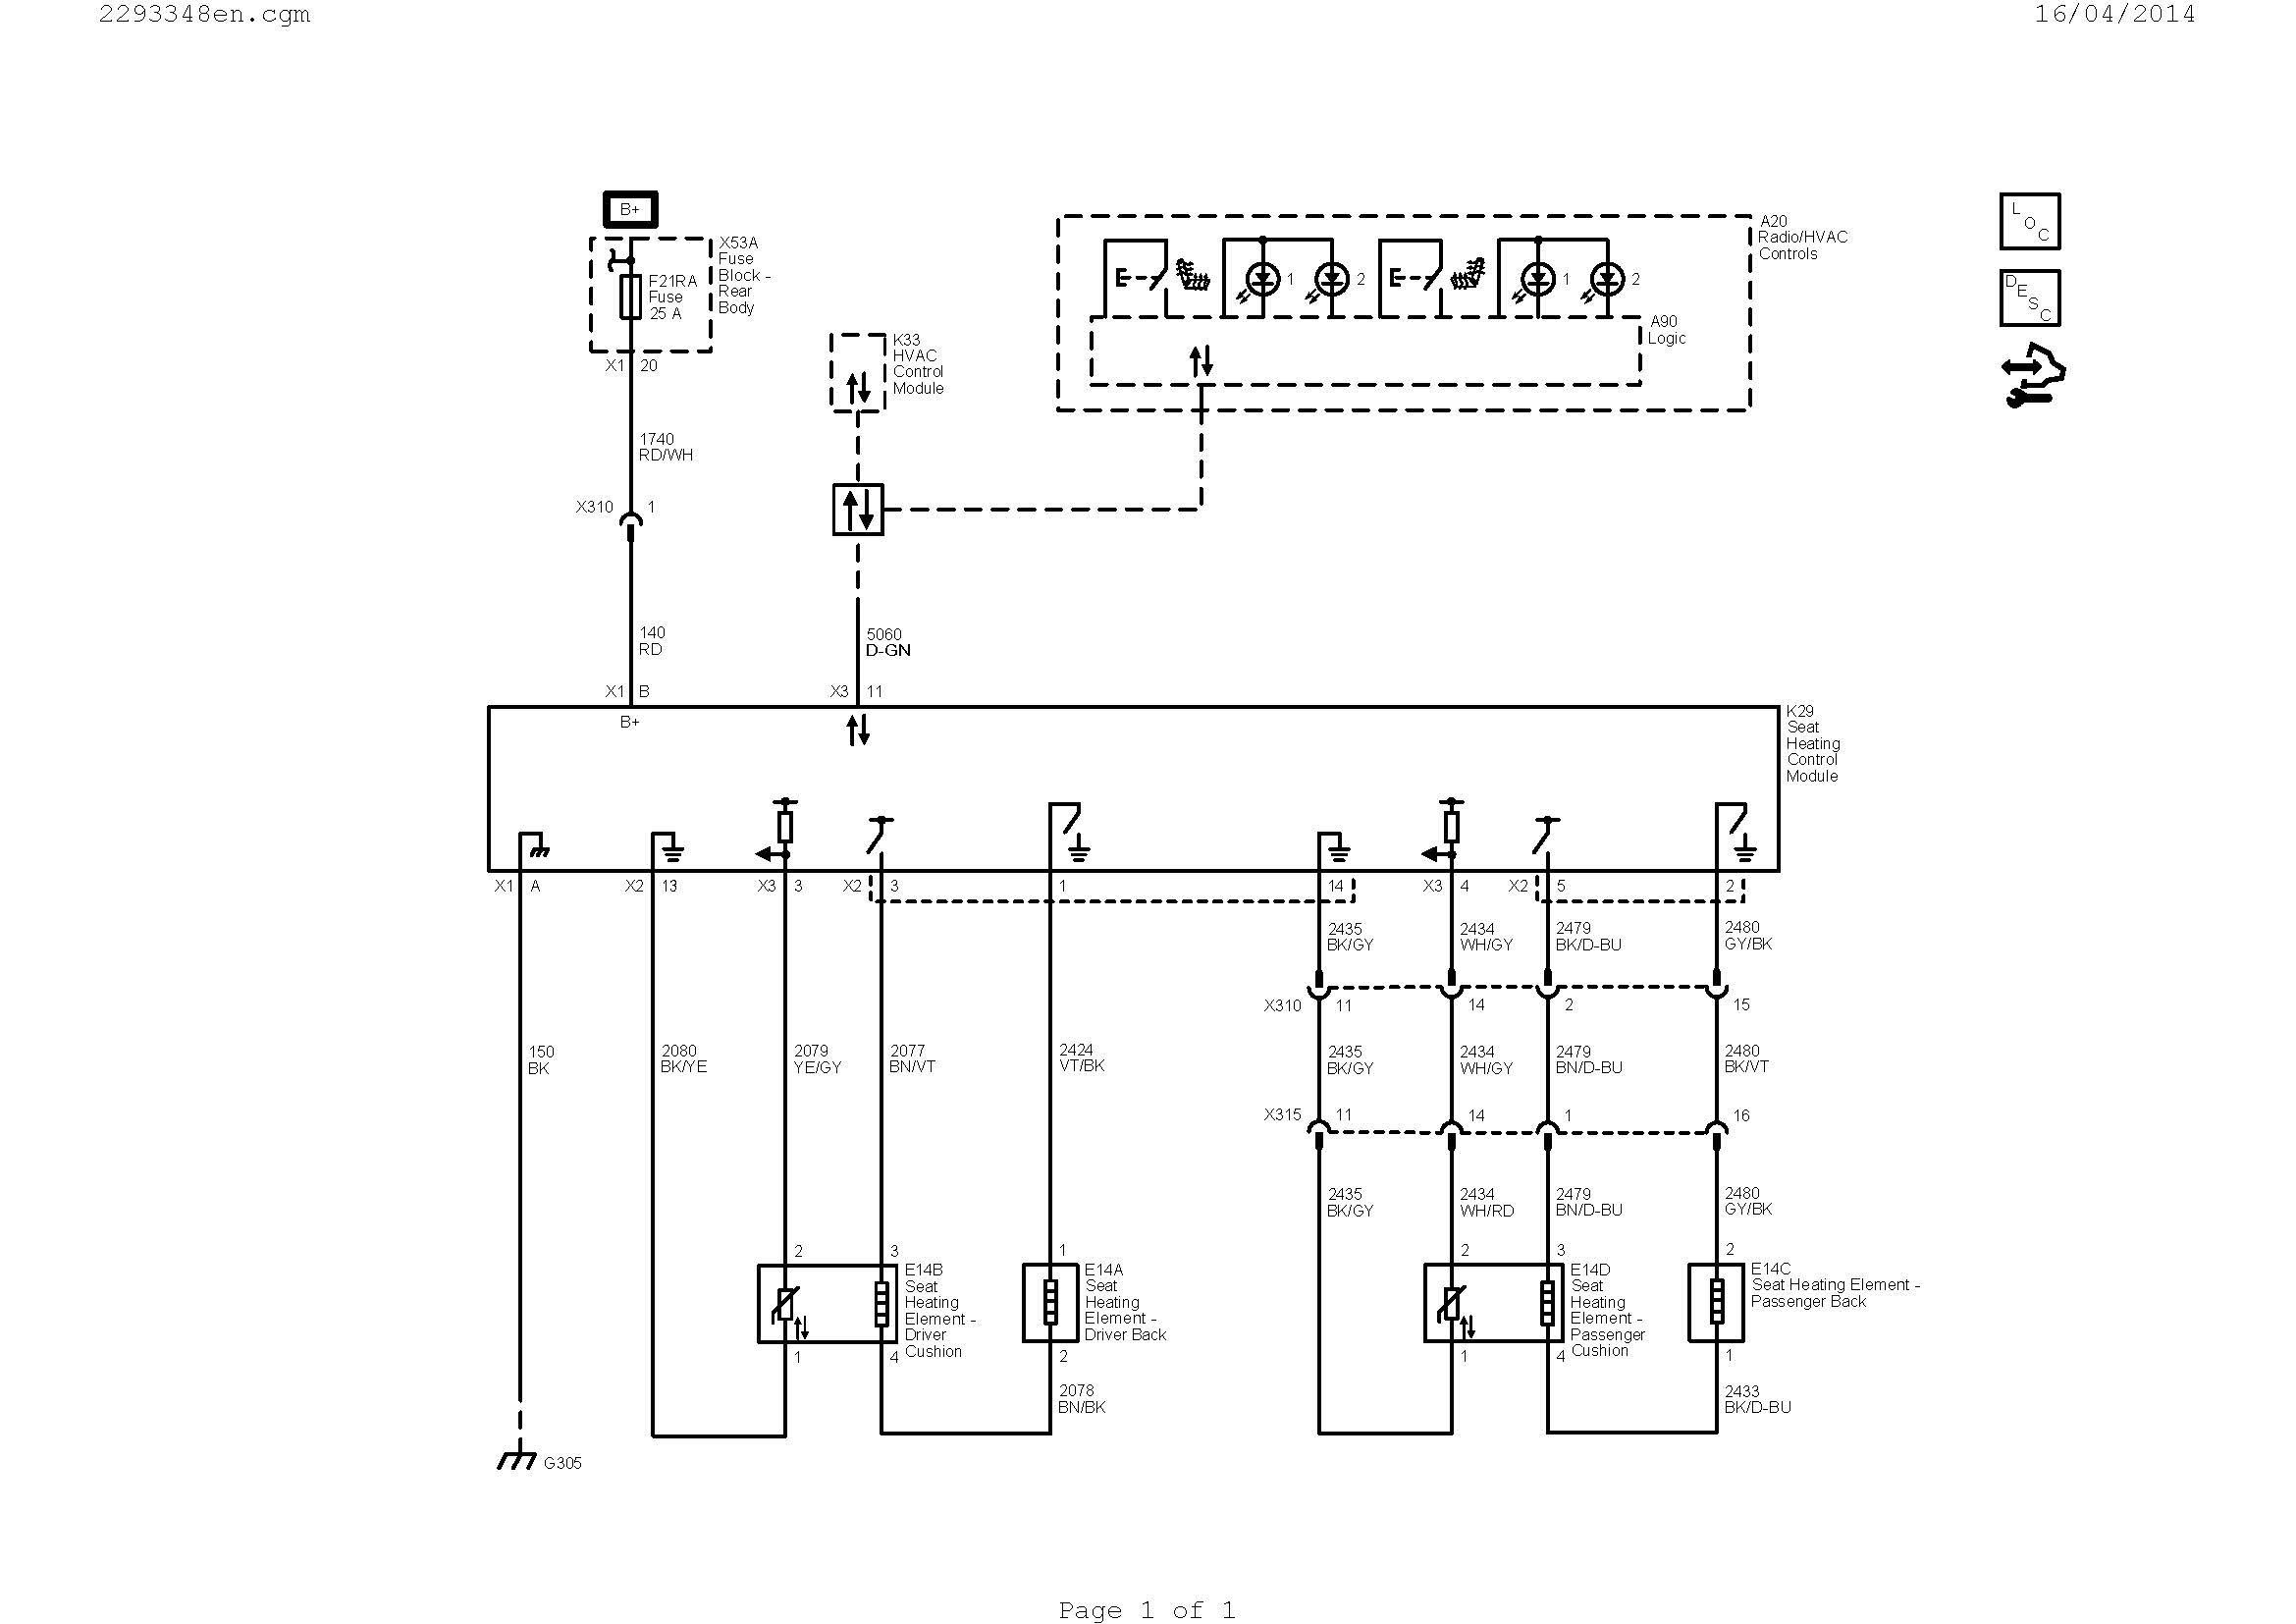 Wiring Diagram for A Relay Switch Save Wiring Diagram Ac Valid Hvac Solenoid Wiring Diagram